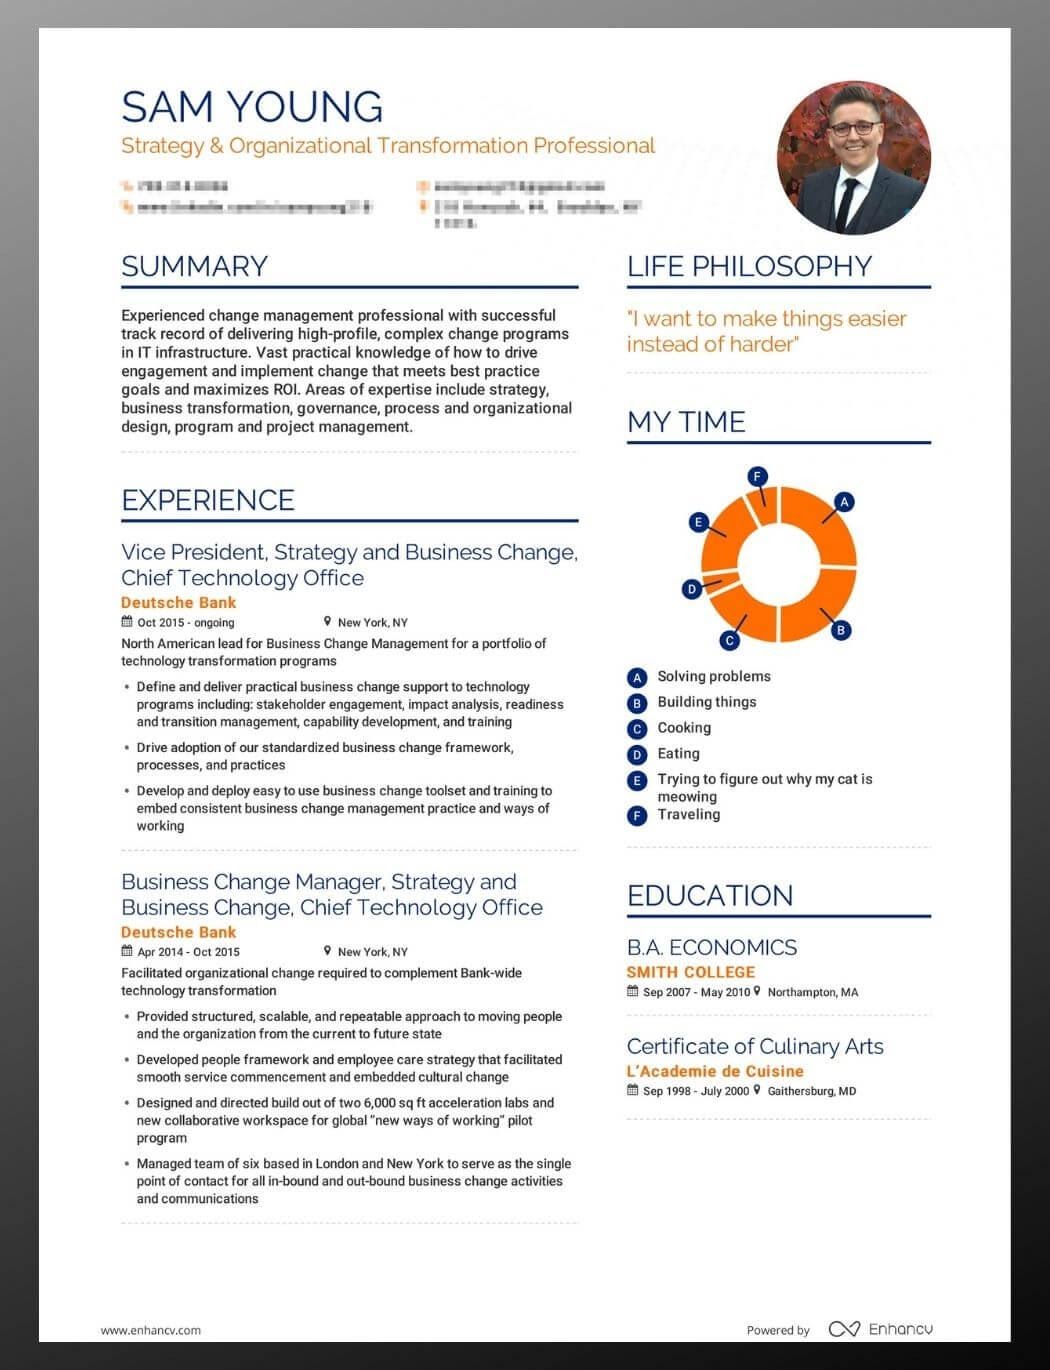 Enhancv A Guide To Types Of Resumes: Best Formats, Tips & Examples 